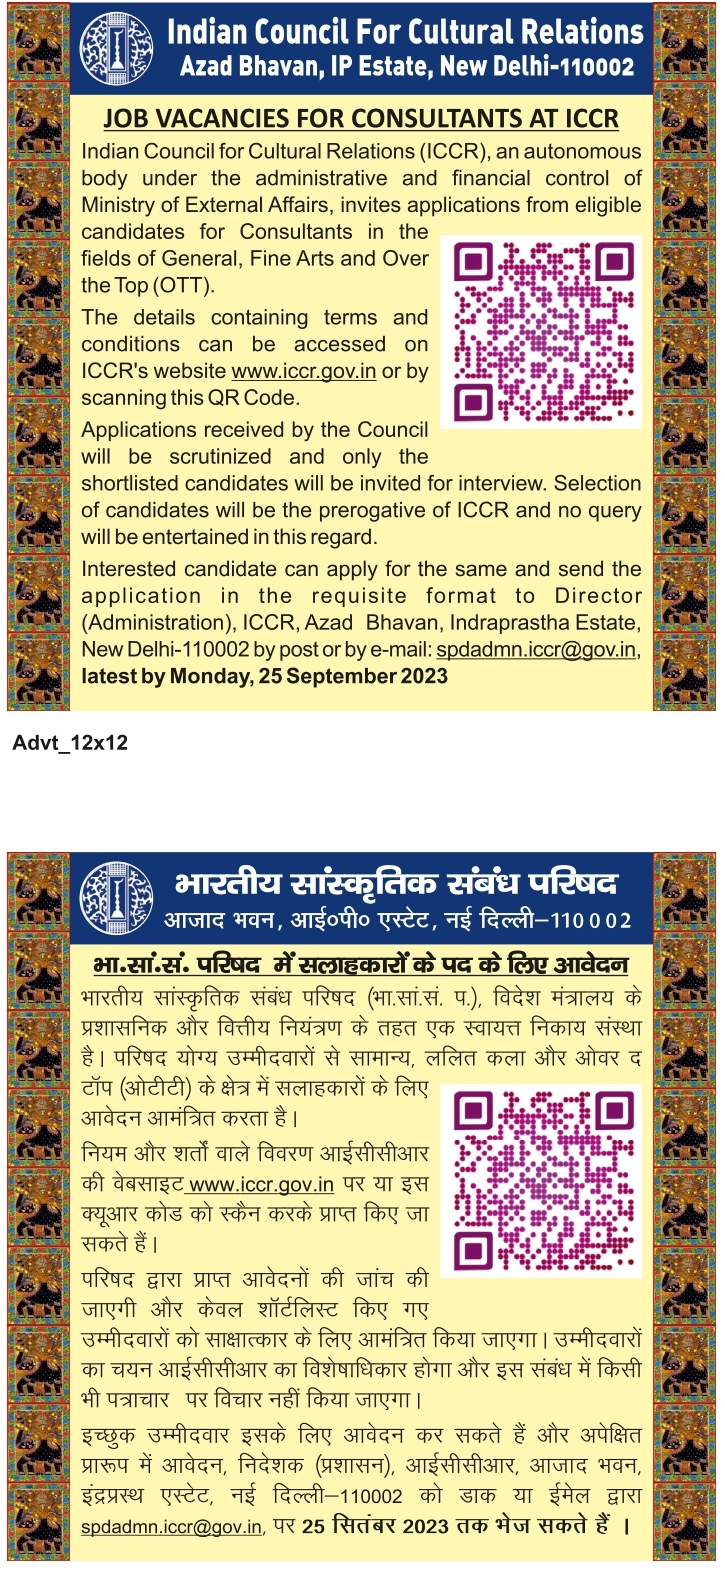  "Advertisement for Hiring of Consultants in ICCR"